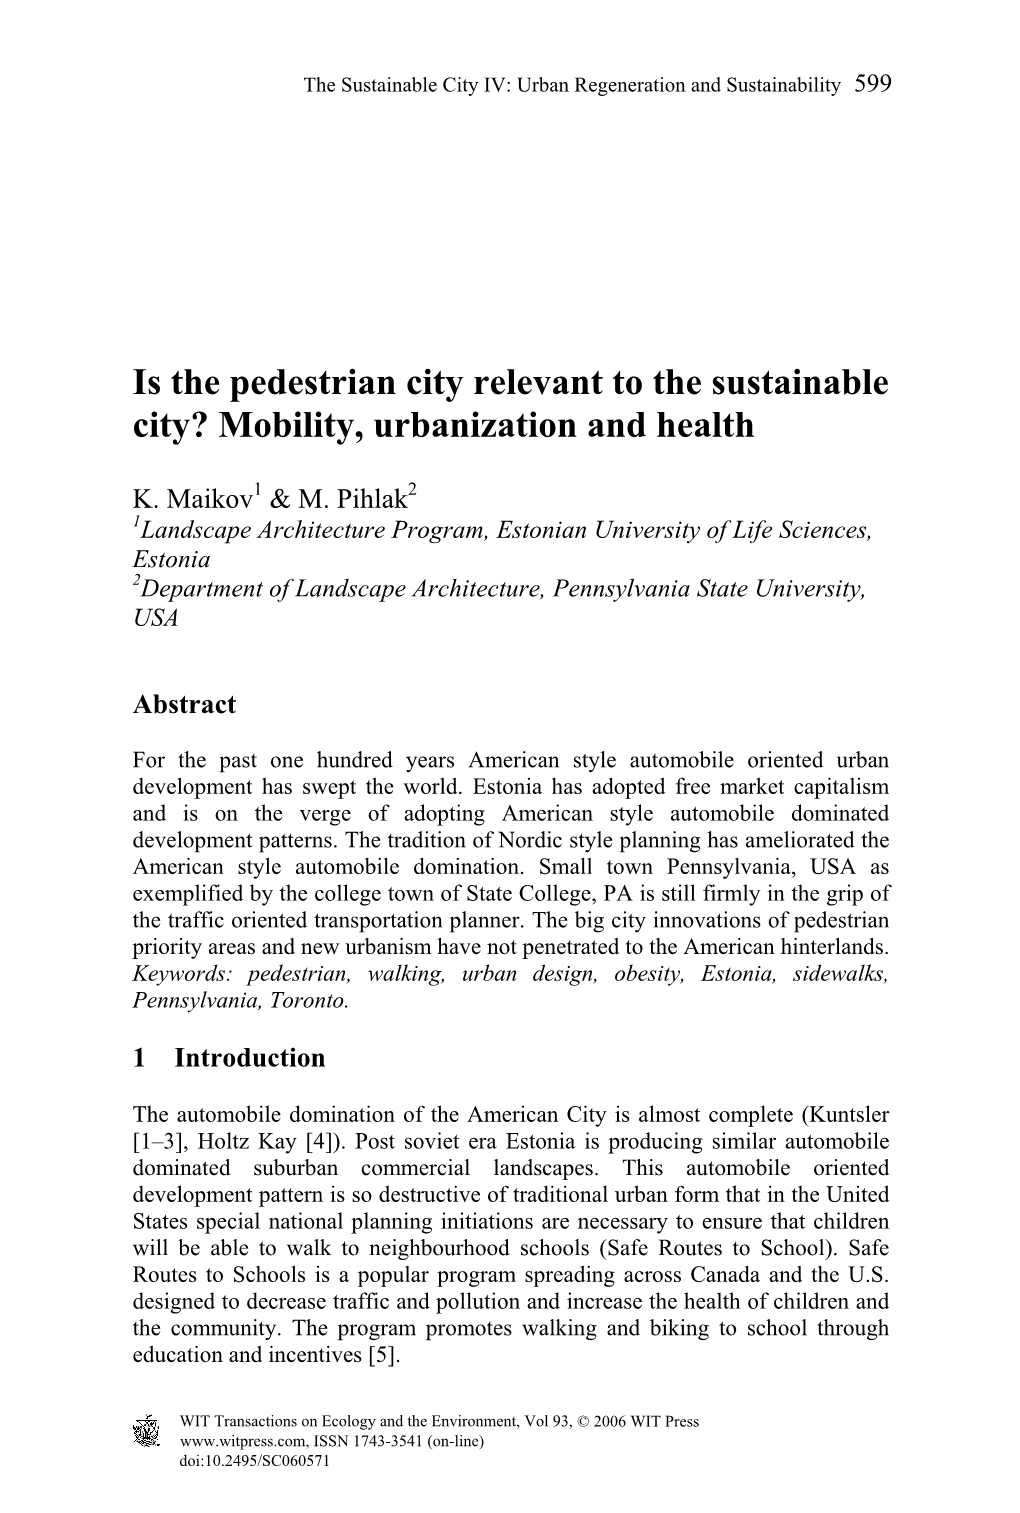 Is the Pedestrian City Relevant to the Sustainable City? Mobility, Urbanization and Health